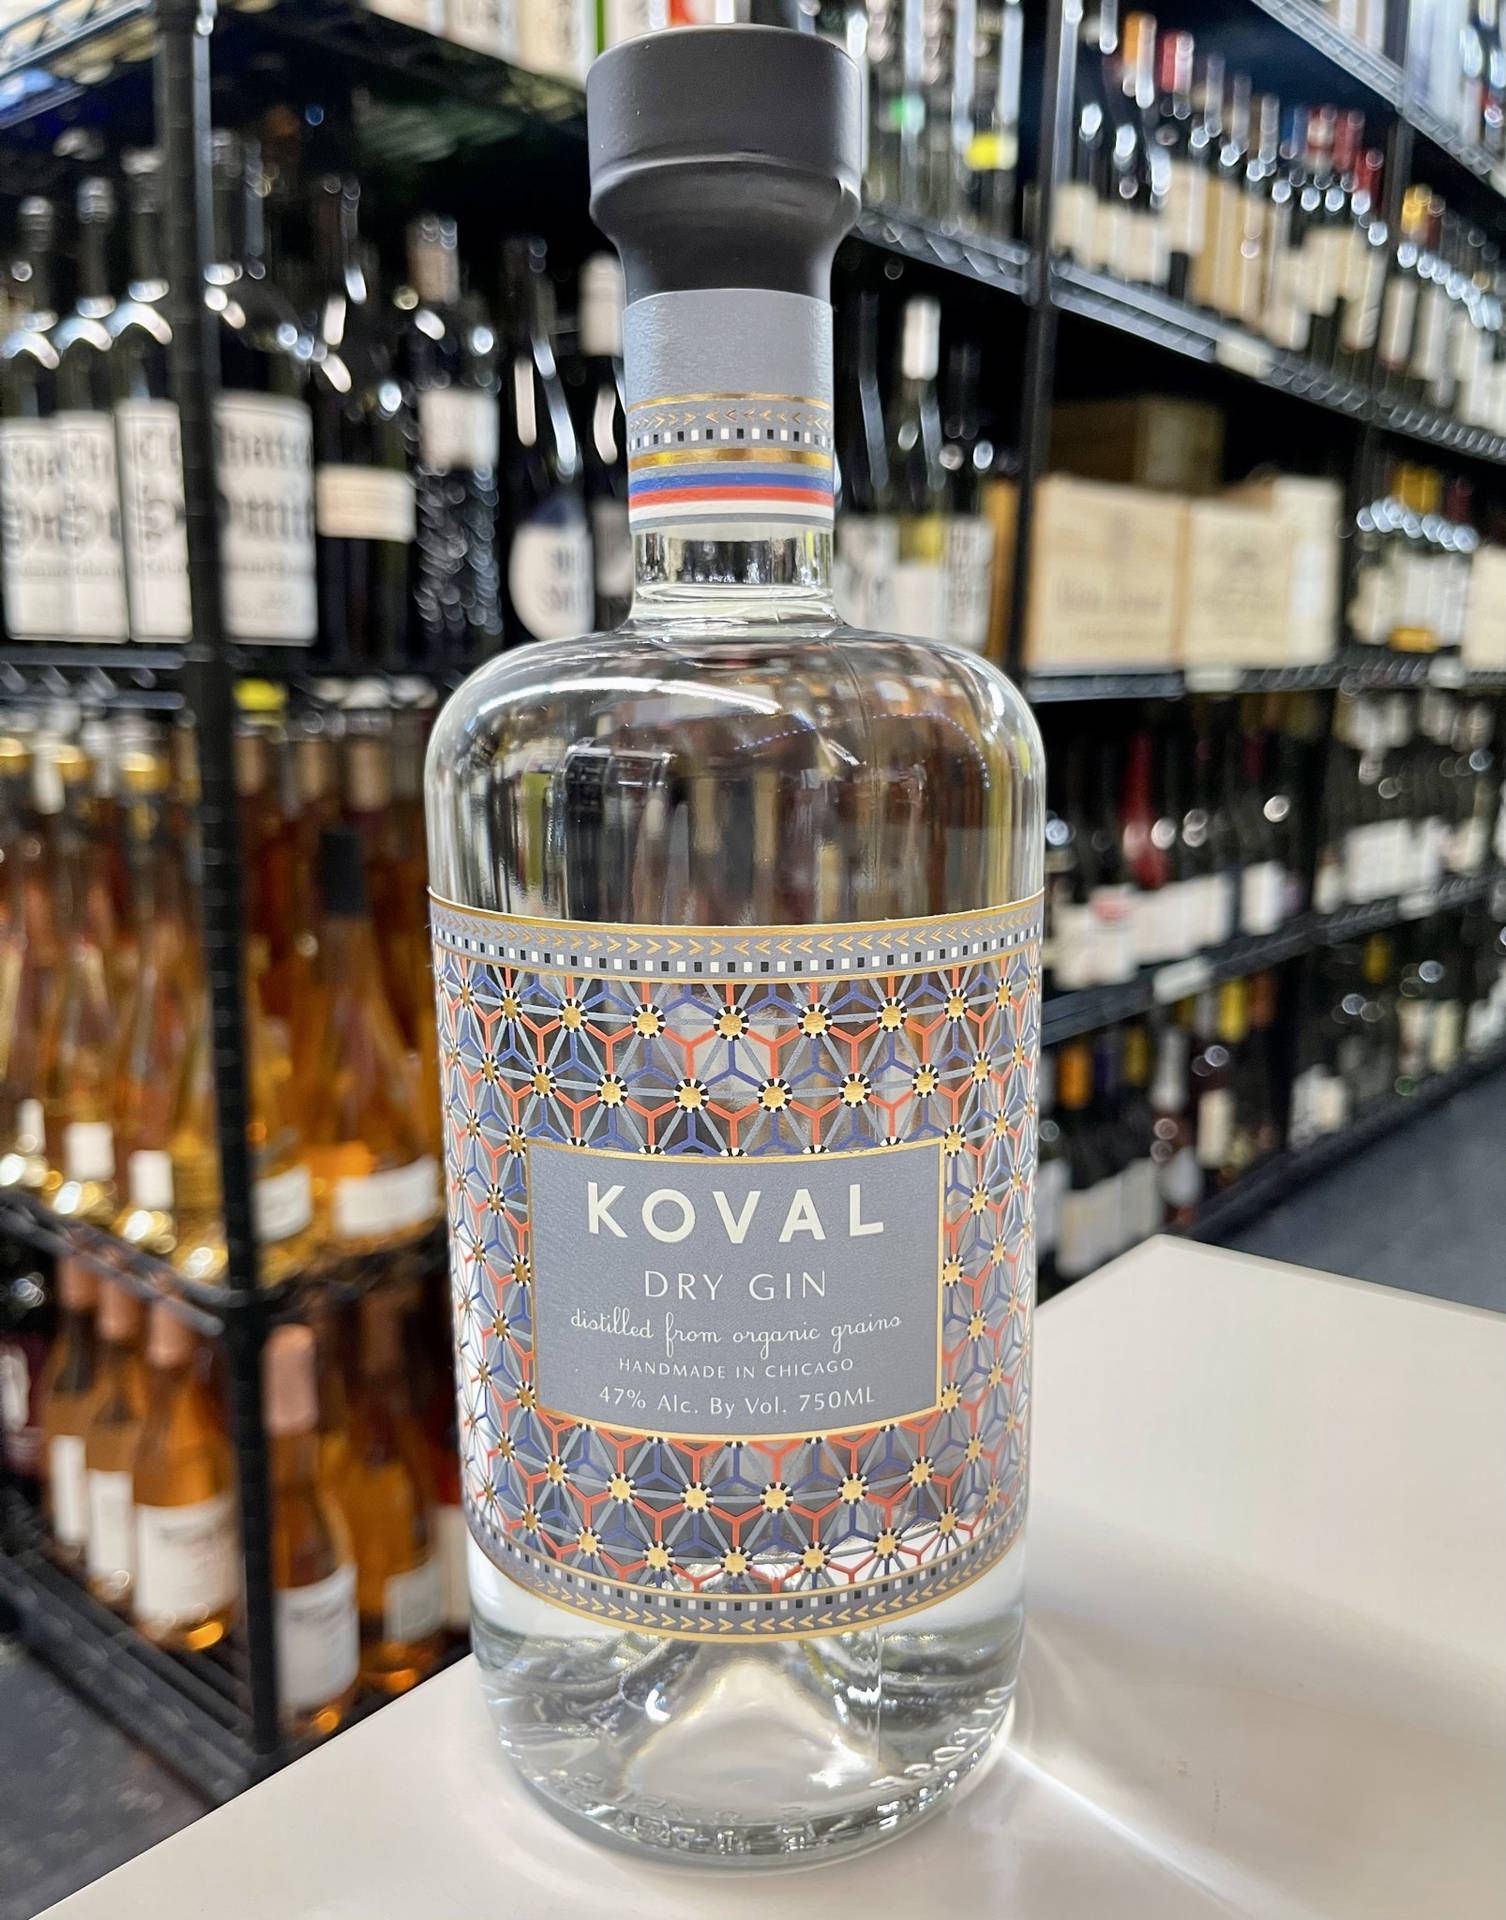 Koval Dry Gin At The Store Background